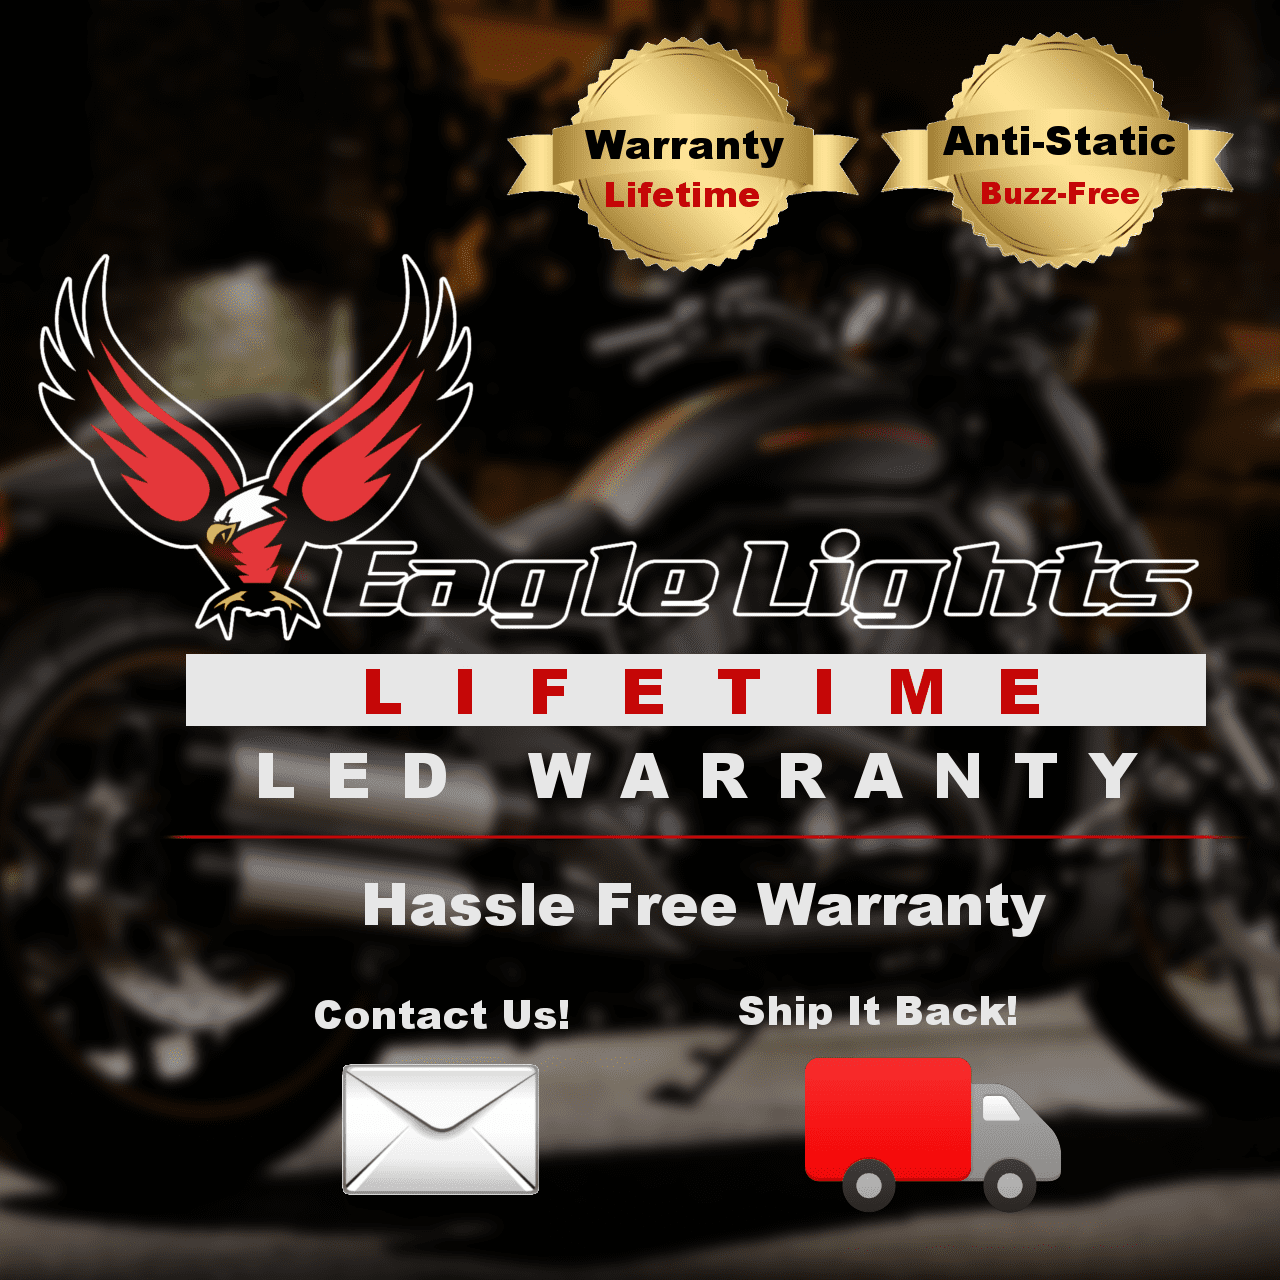 5 ¾” Halo & DRL LED Headlights - Eagle Lights 5 3/4" LED Projector Headlight With Integrated Turn Signals For Harley Davidson 5.75'' LED Projection Head Lamp*